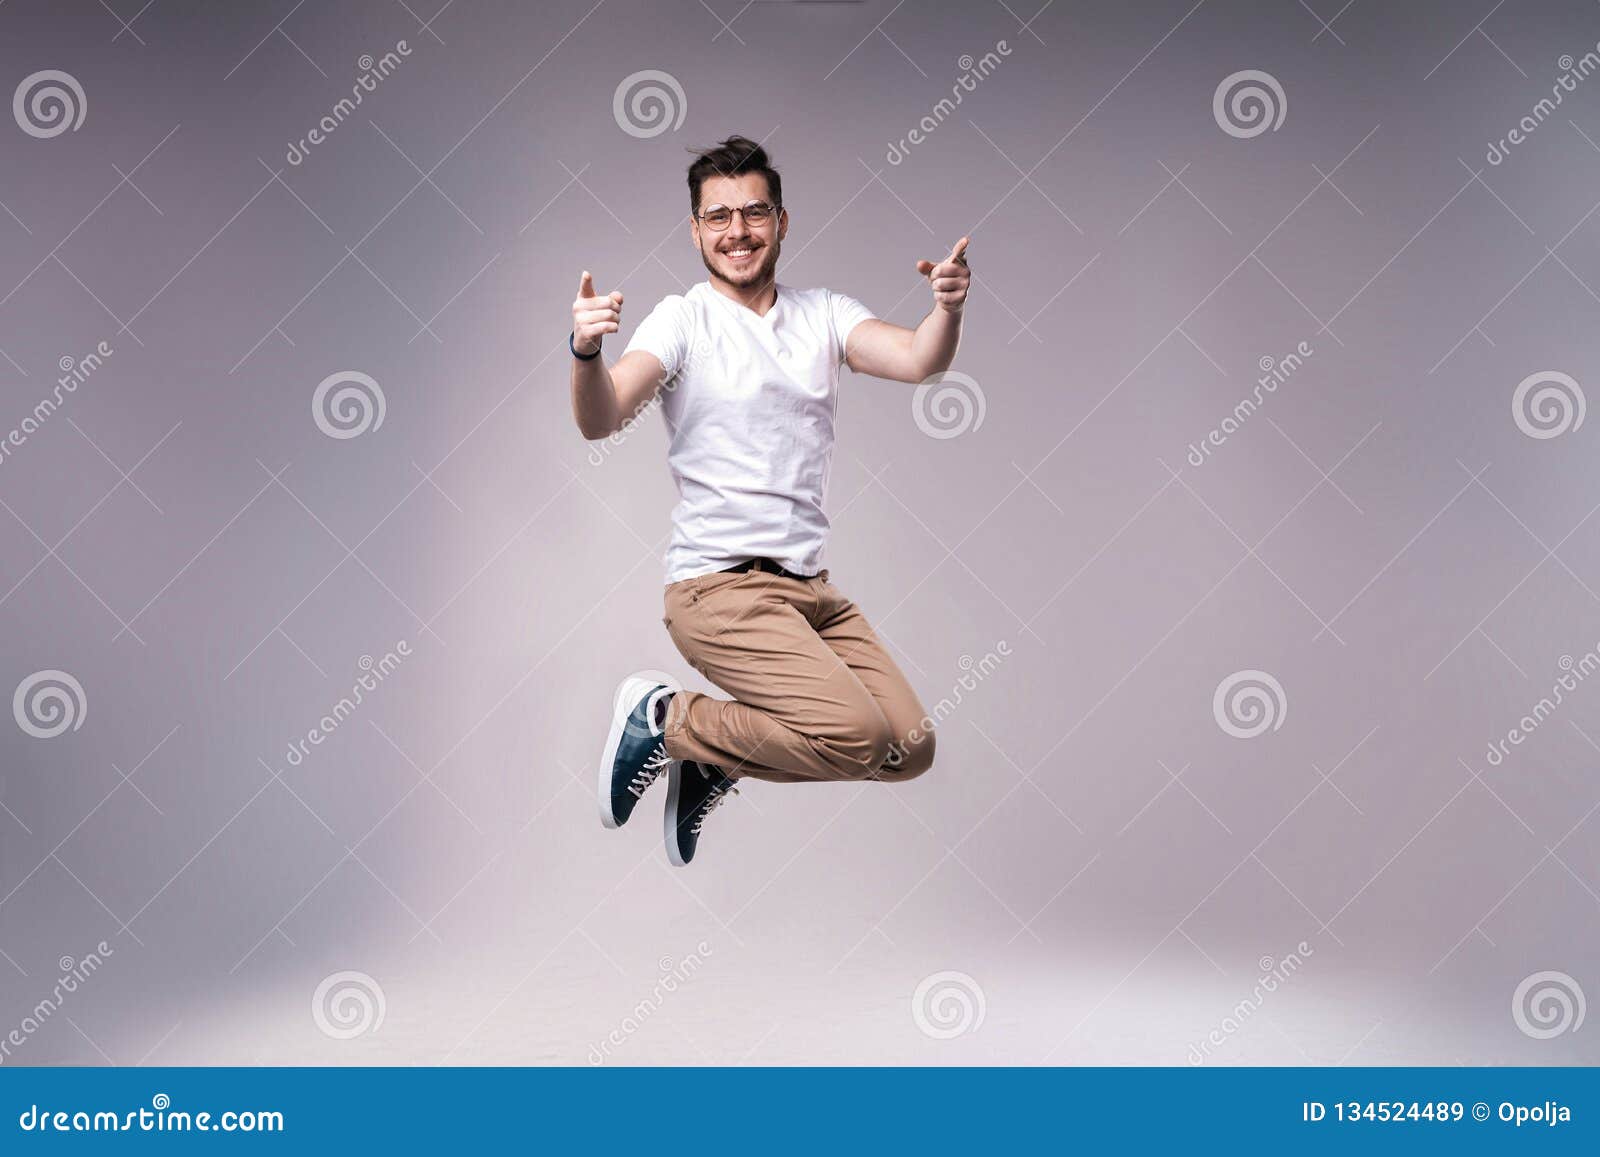 Handsome Man Casual Dressed Celebrating and Jumping on Gray Background ...